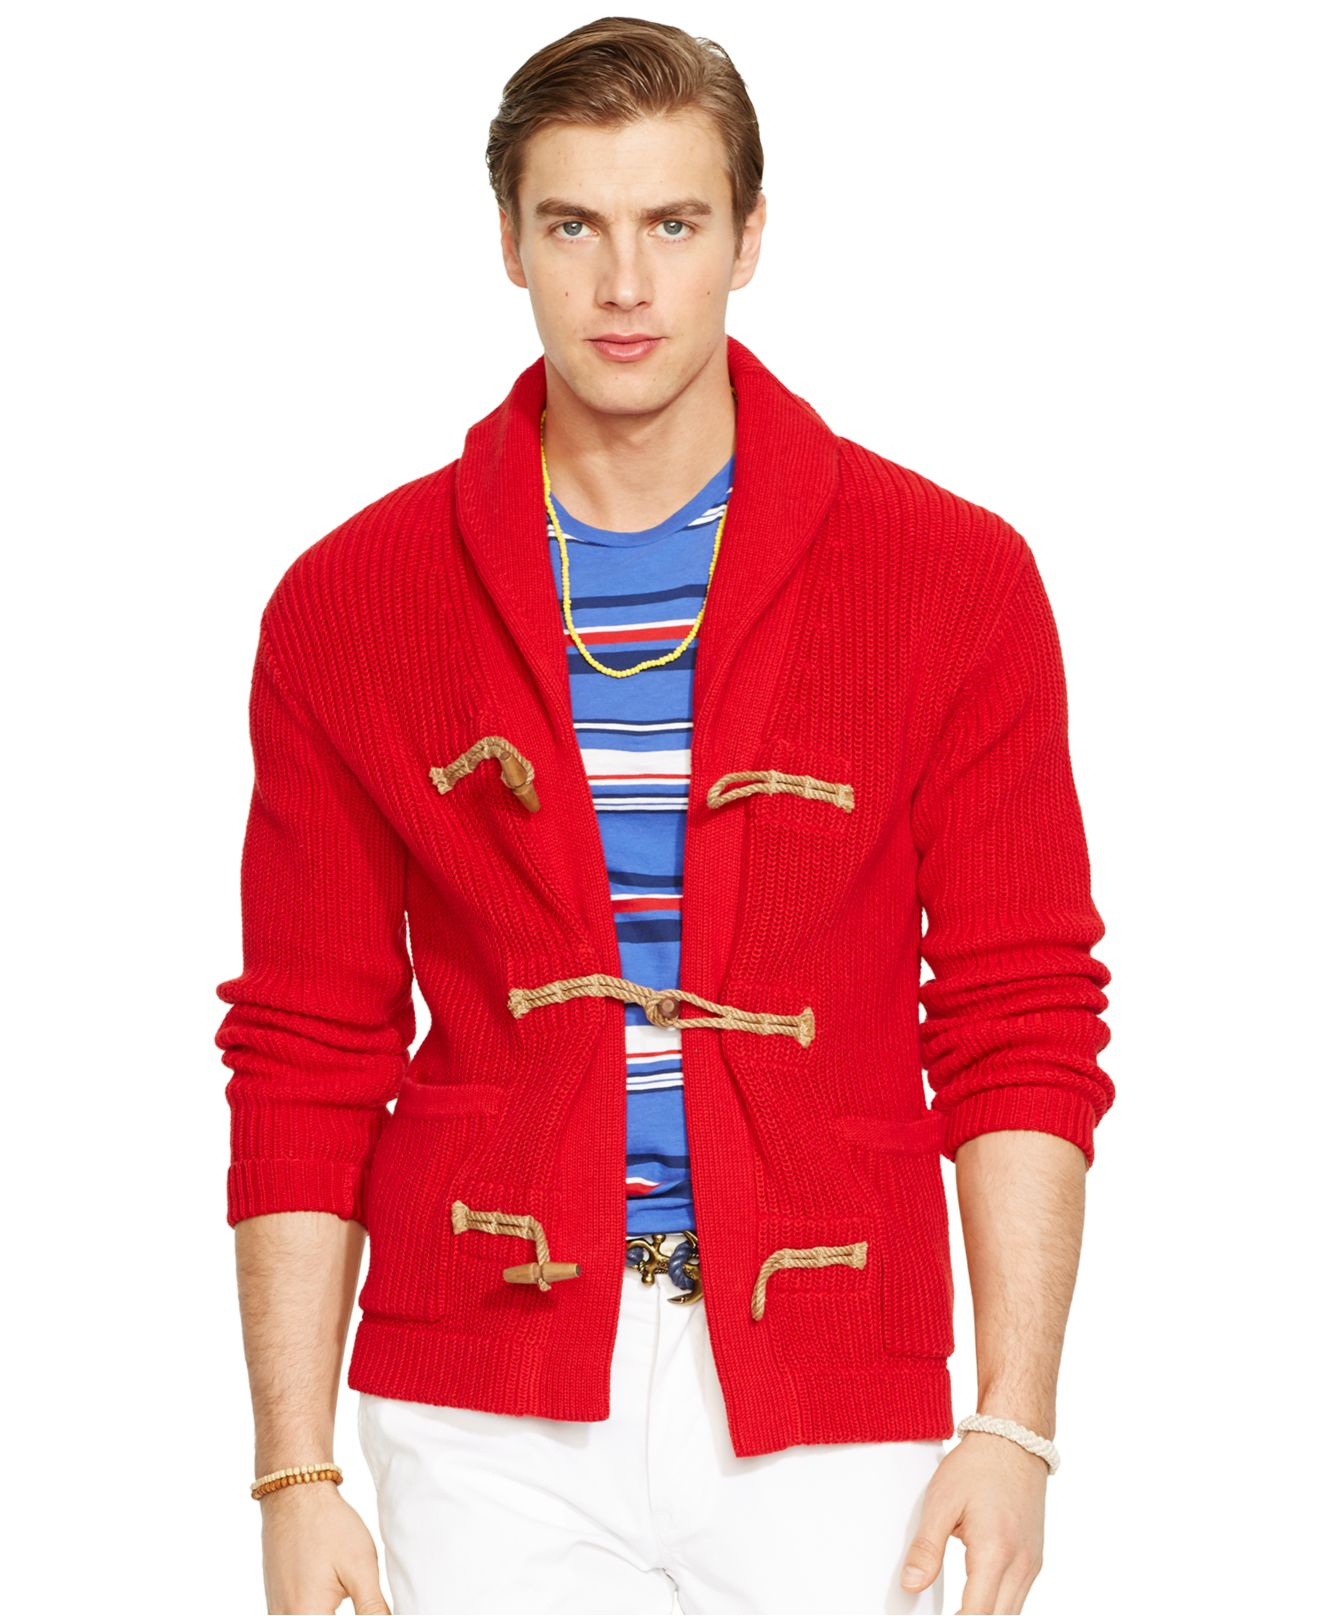 Lyst - Polo Ralph Lauren Egyptian-Cotton Shawl Cardigan Sweater in Red ...